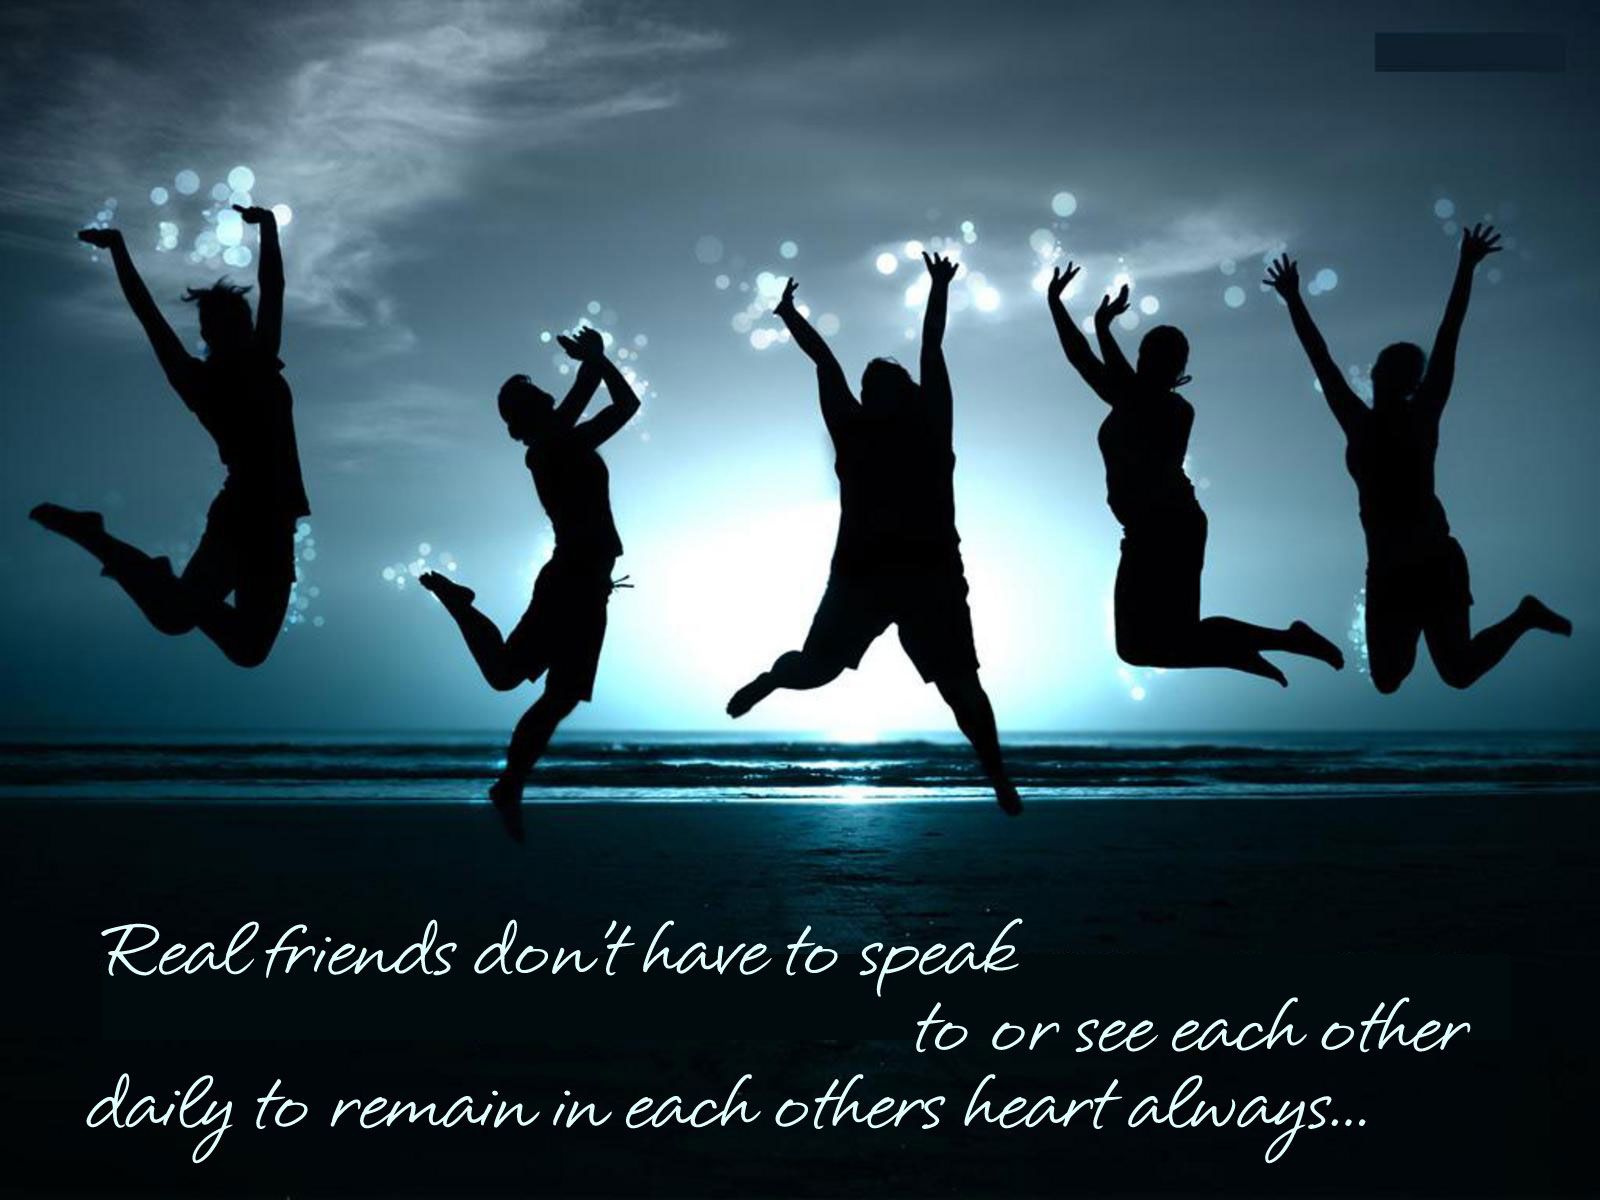 Deep Quotes About Friendship and Loyalty With Image